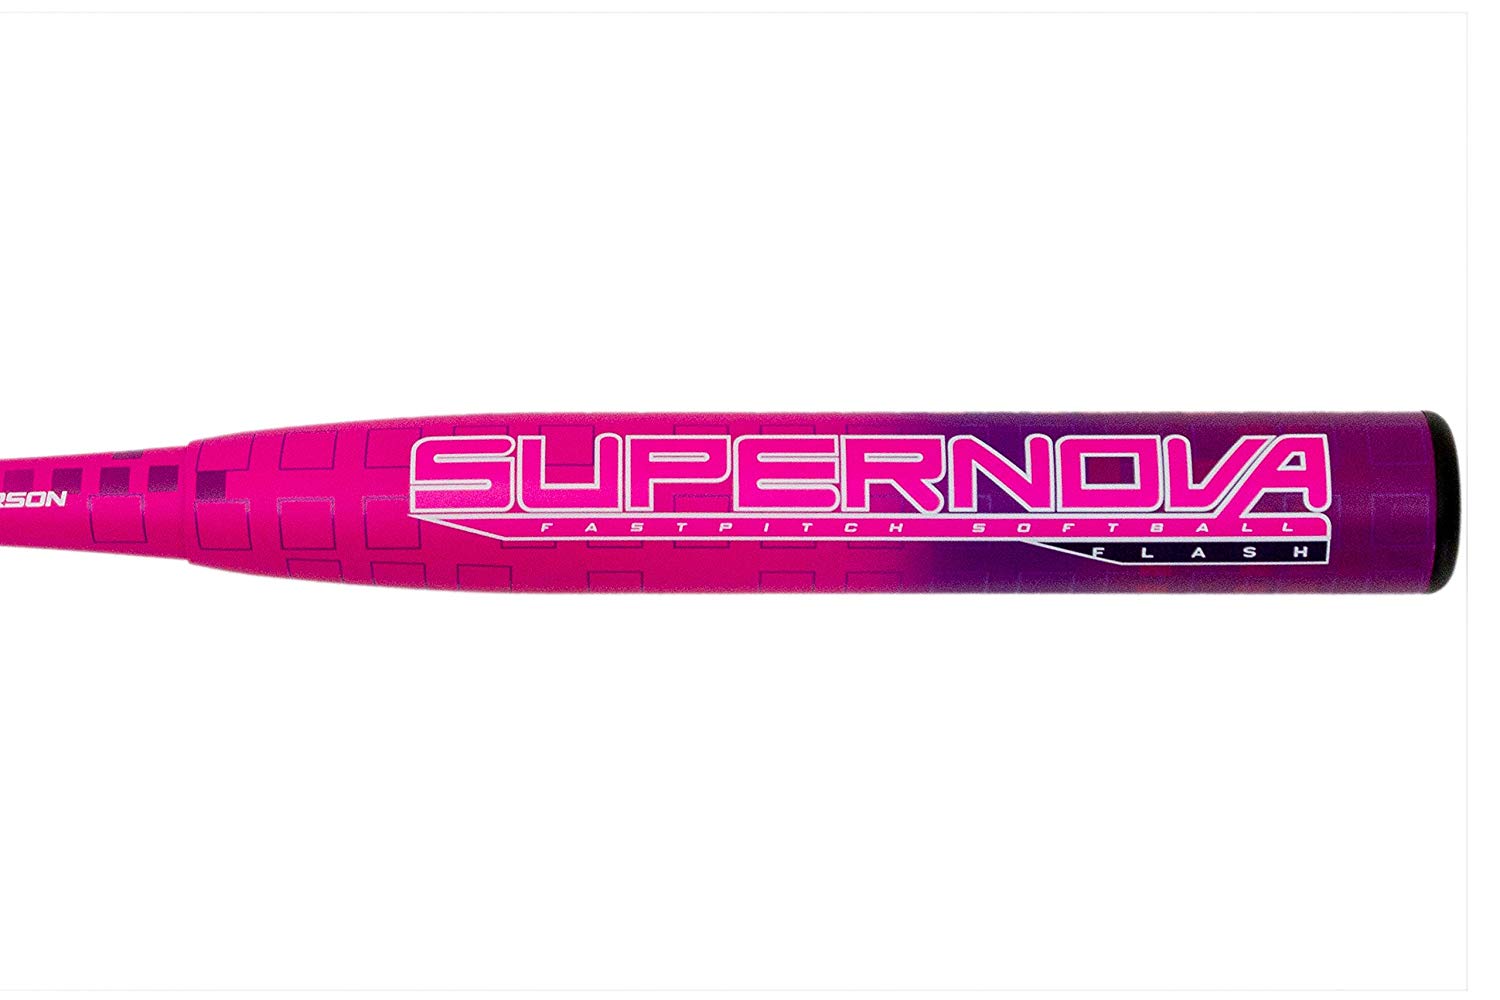 anderson-2019-supernova-flash-11-fastpitch-softball-bat-29-in-18-oz 017040-2918 Anderson 874147009291 2 ¼” Barrel -11 Drop Weight Two-piece composite design eliminates stings